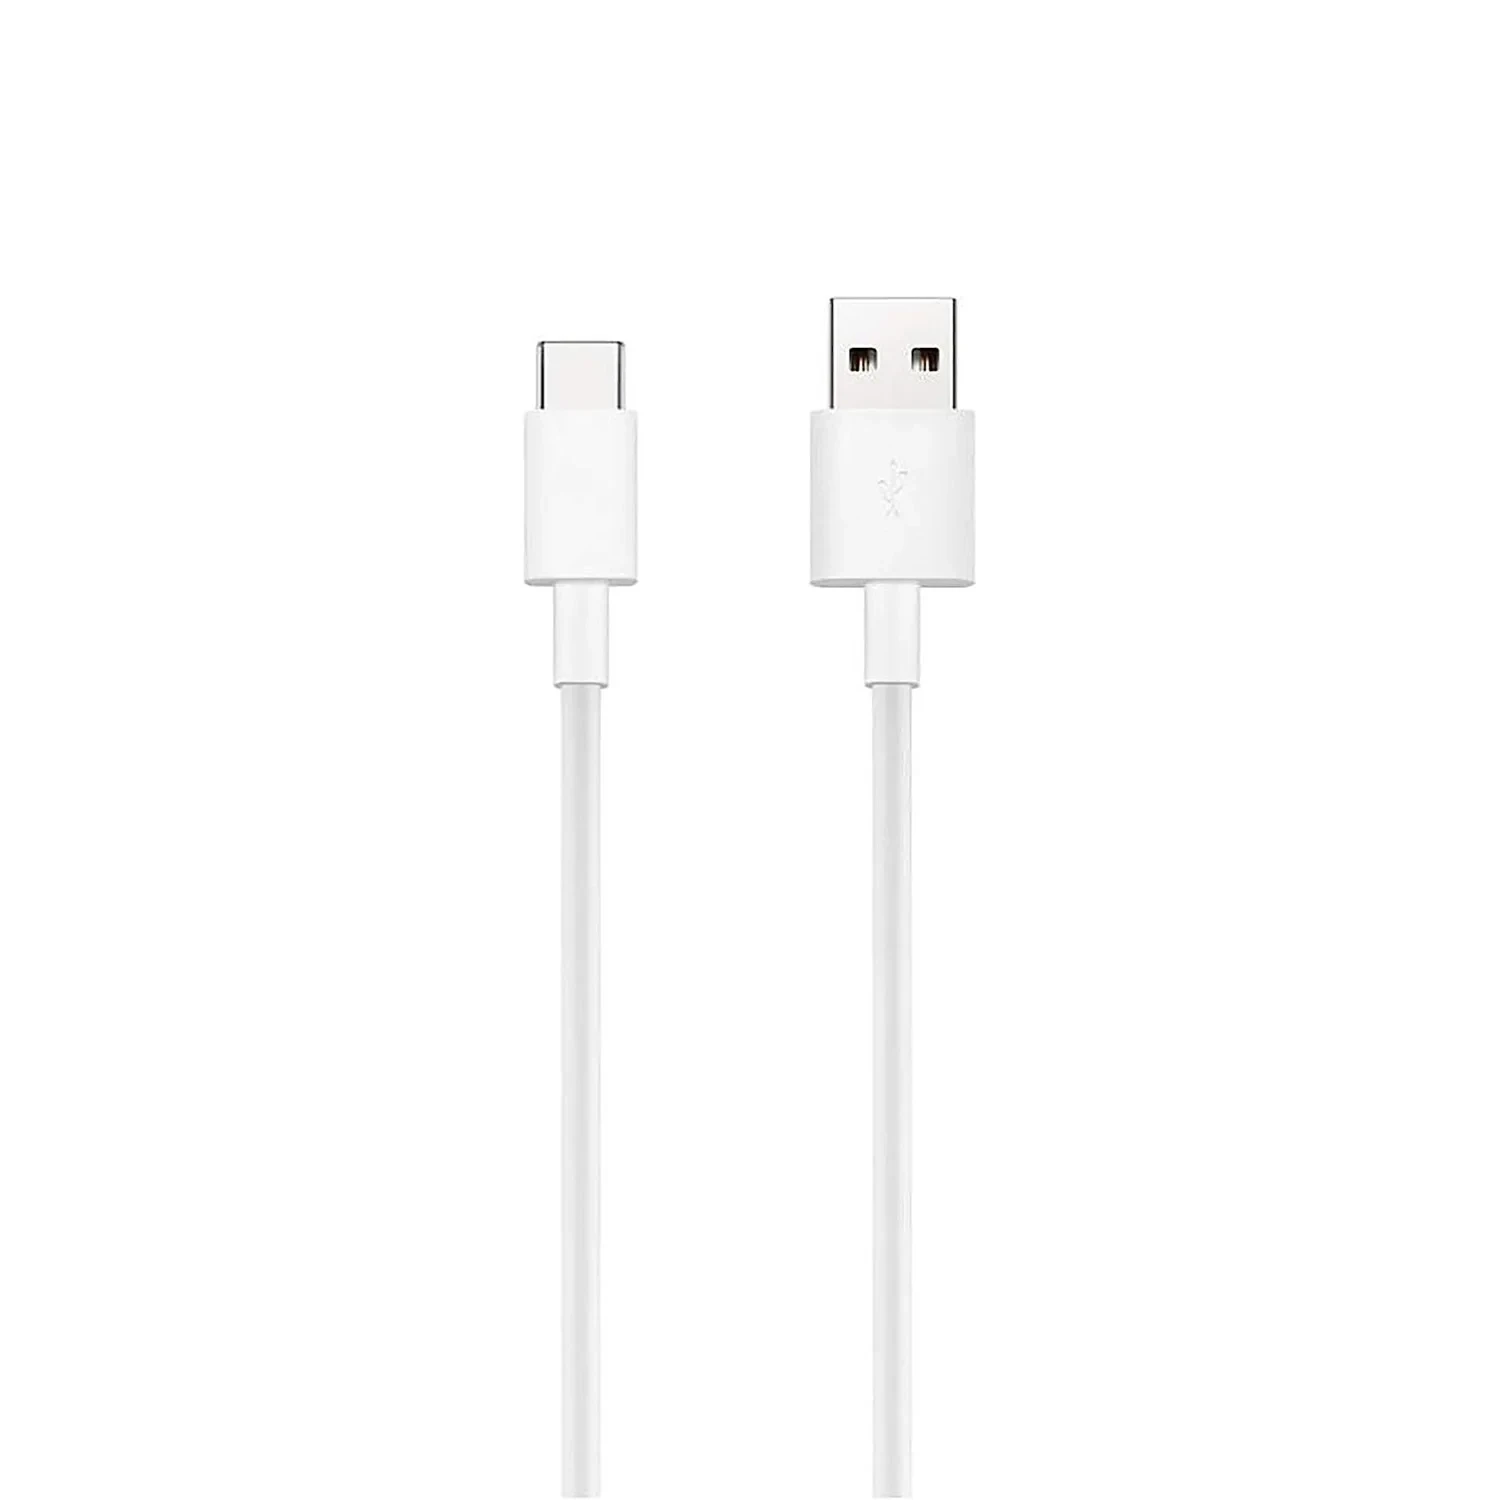 HUAWEI Signal Cable,5V~12V/3A USB2.0 USB-A to USB-C Charge Data